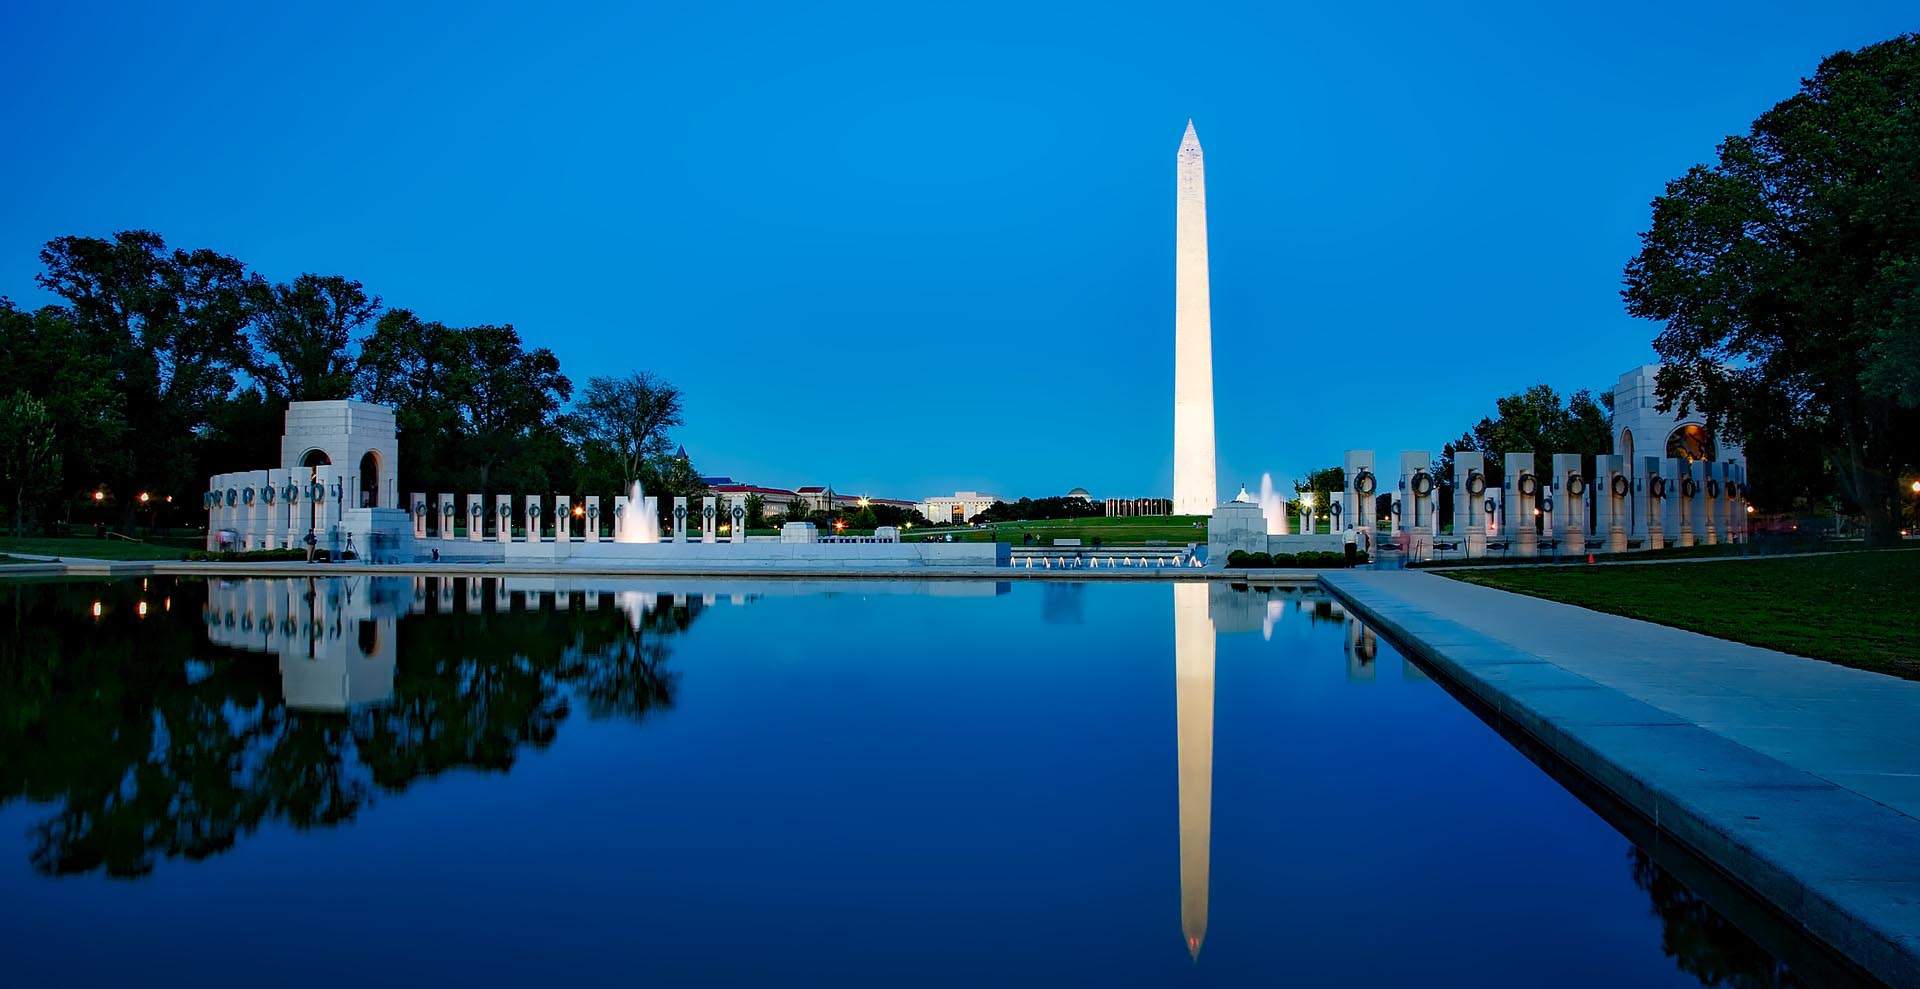 The Best U.S. History Tours To Add To Your Next Road Trip